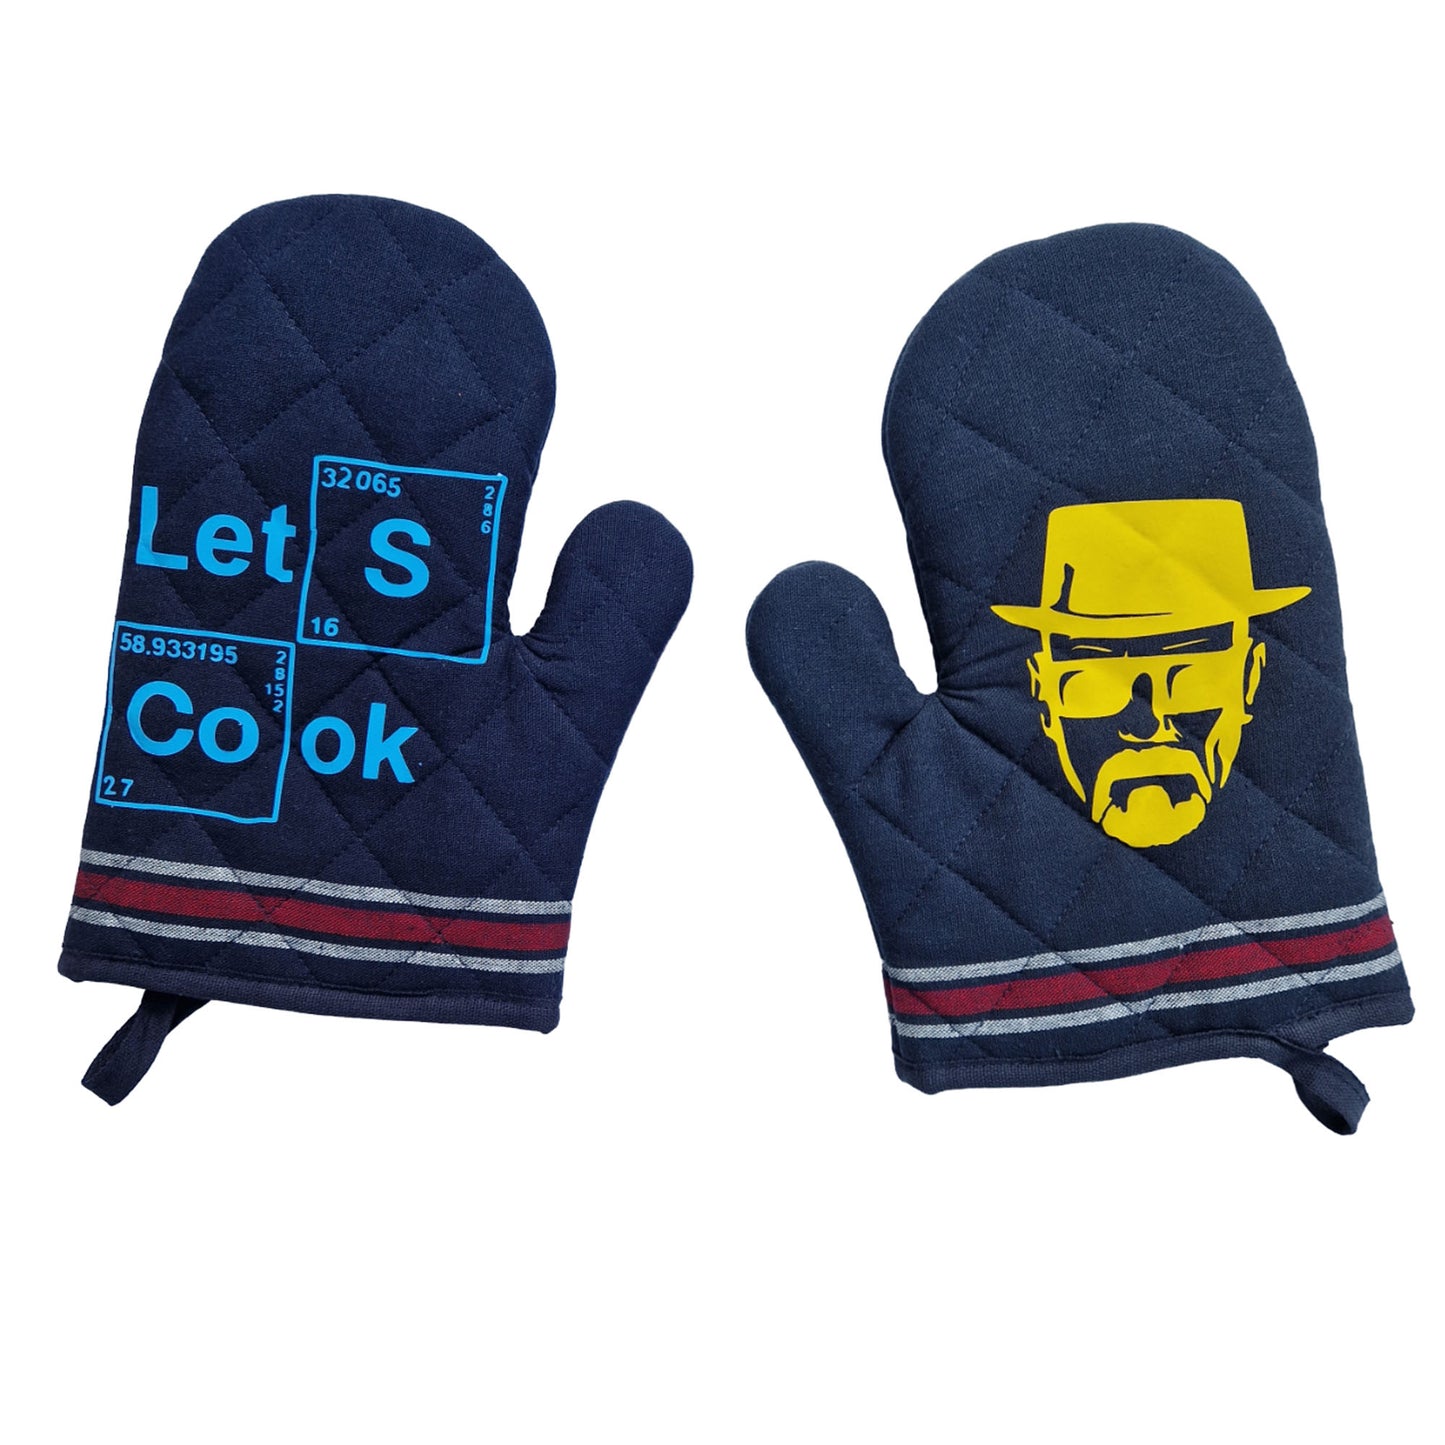 lets cook and heisenberg design oven gloves in blue and yellow